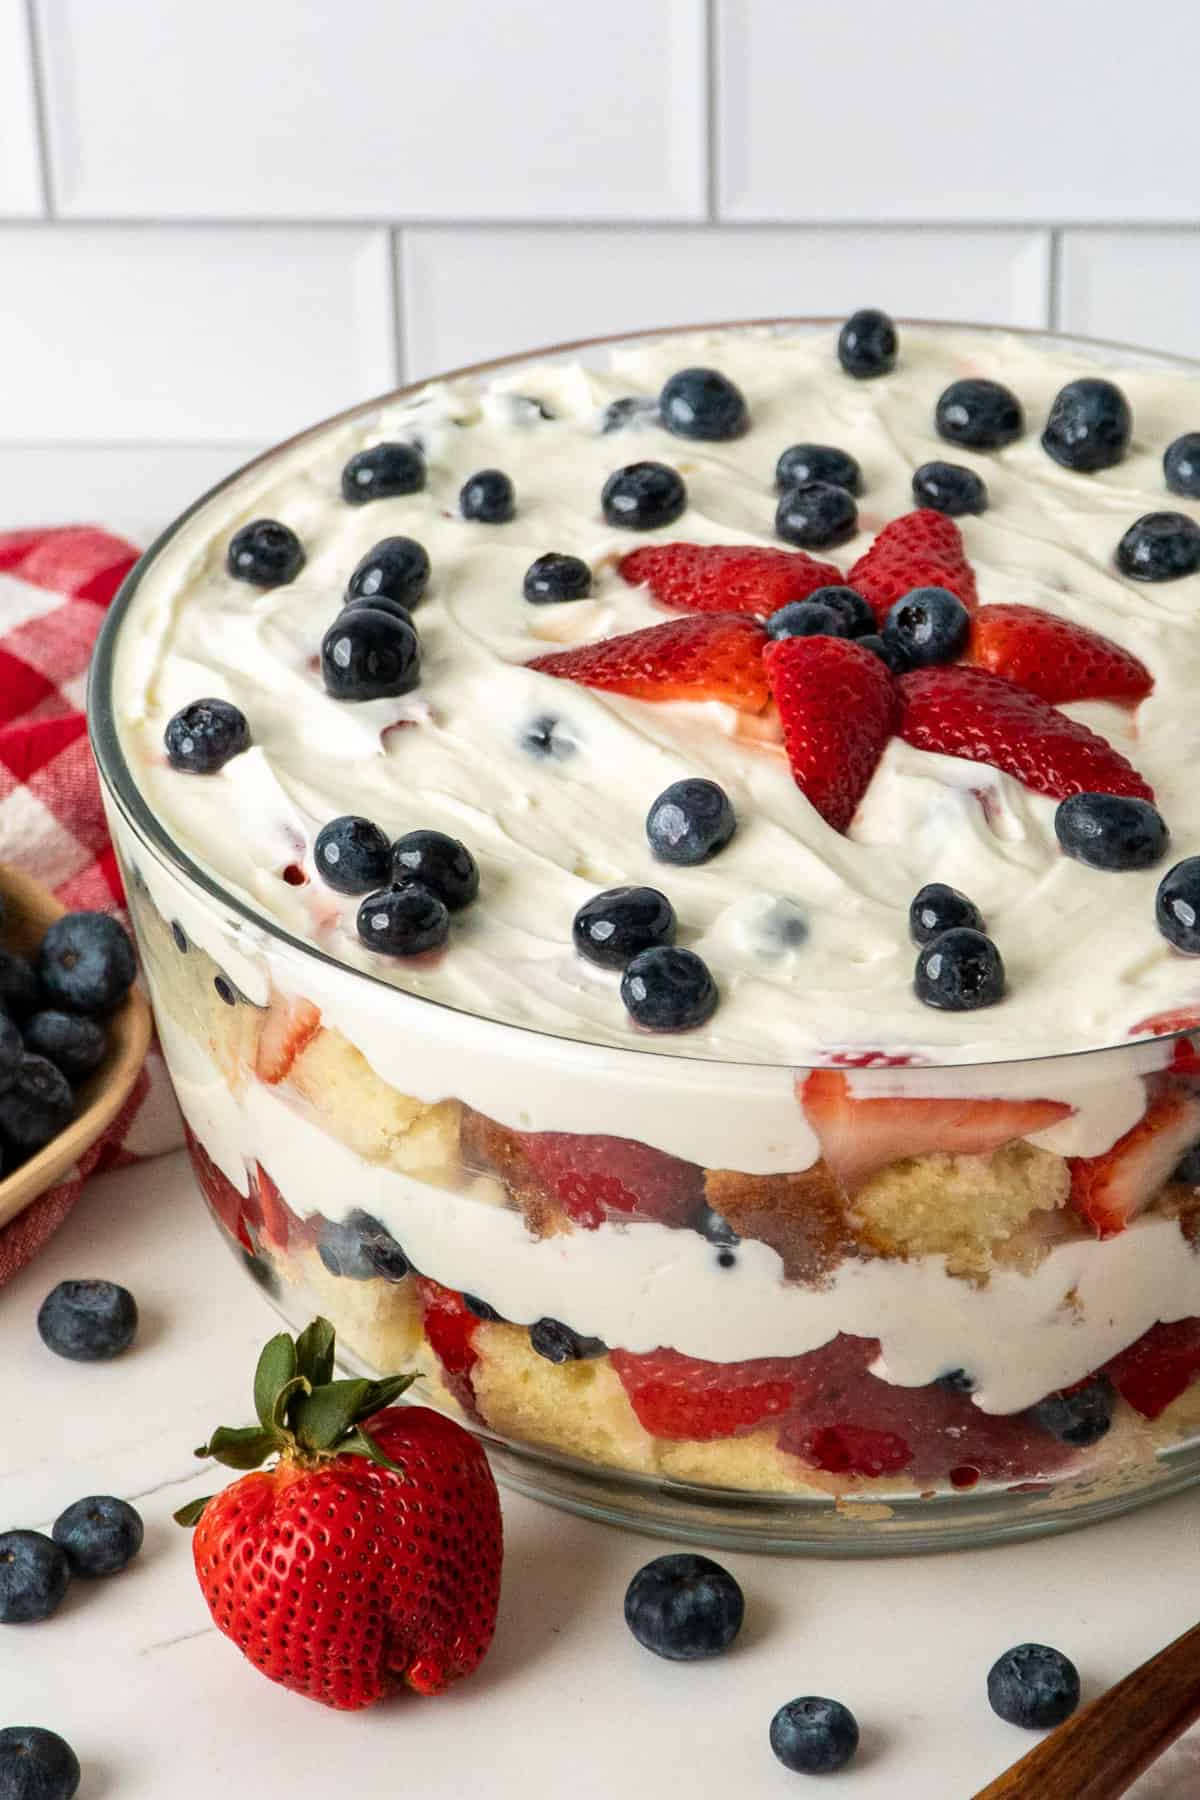 A fun summer dessert in with berries in a glass bowl.